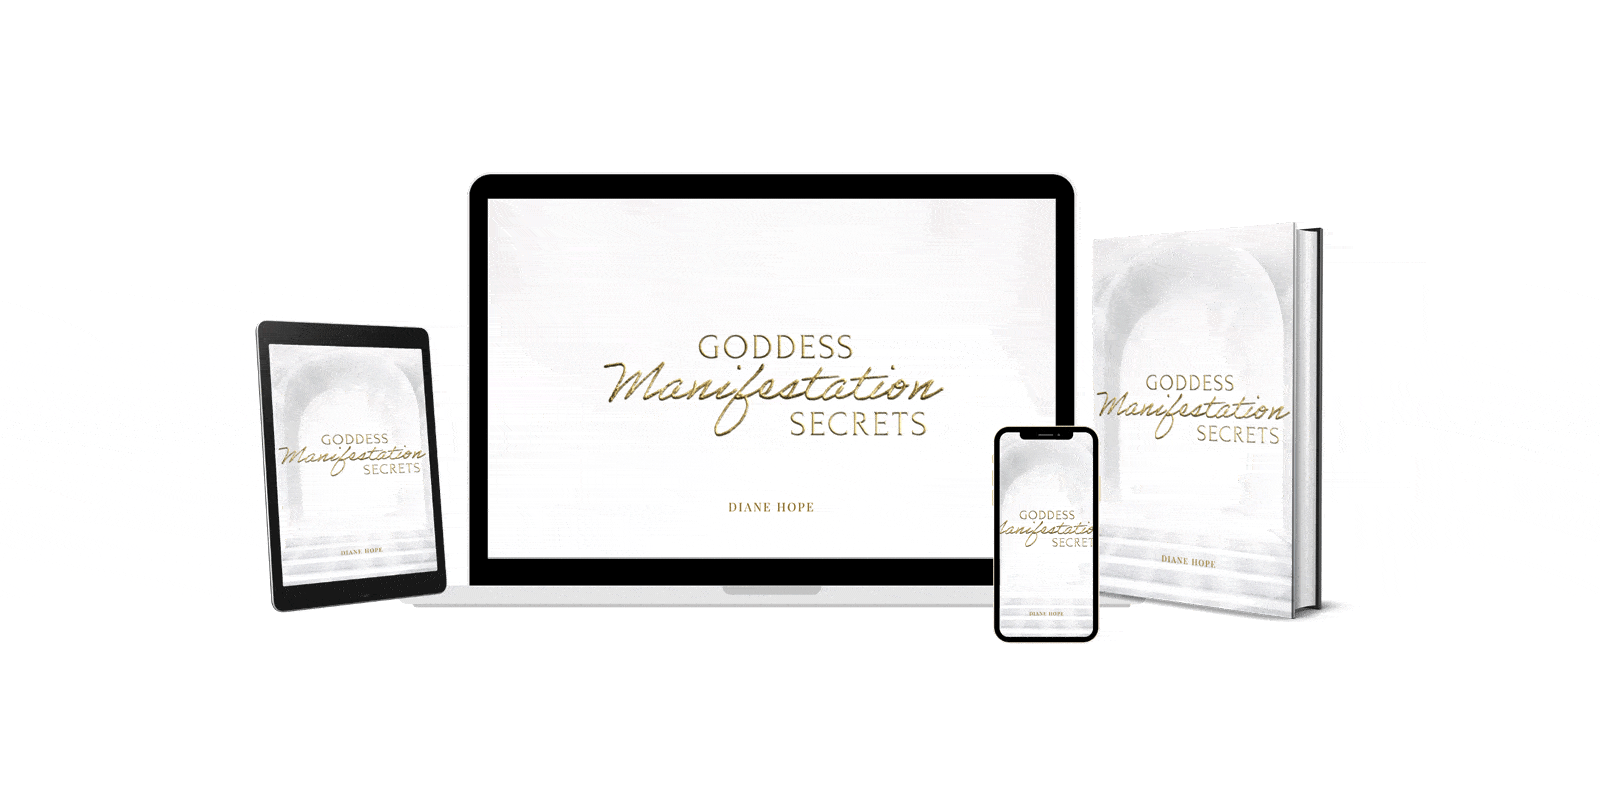 Goddess Manifestation Secrets Reviews - Read This Before Buying!